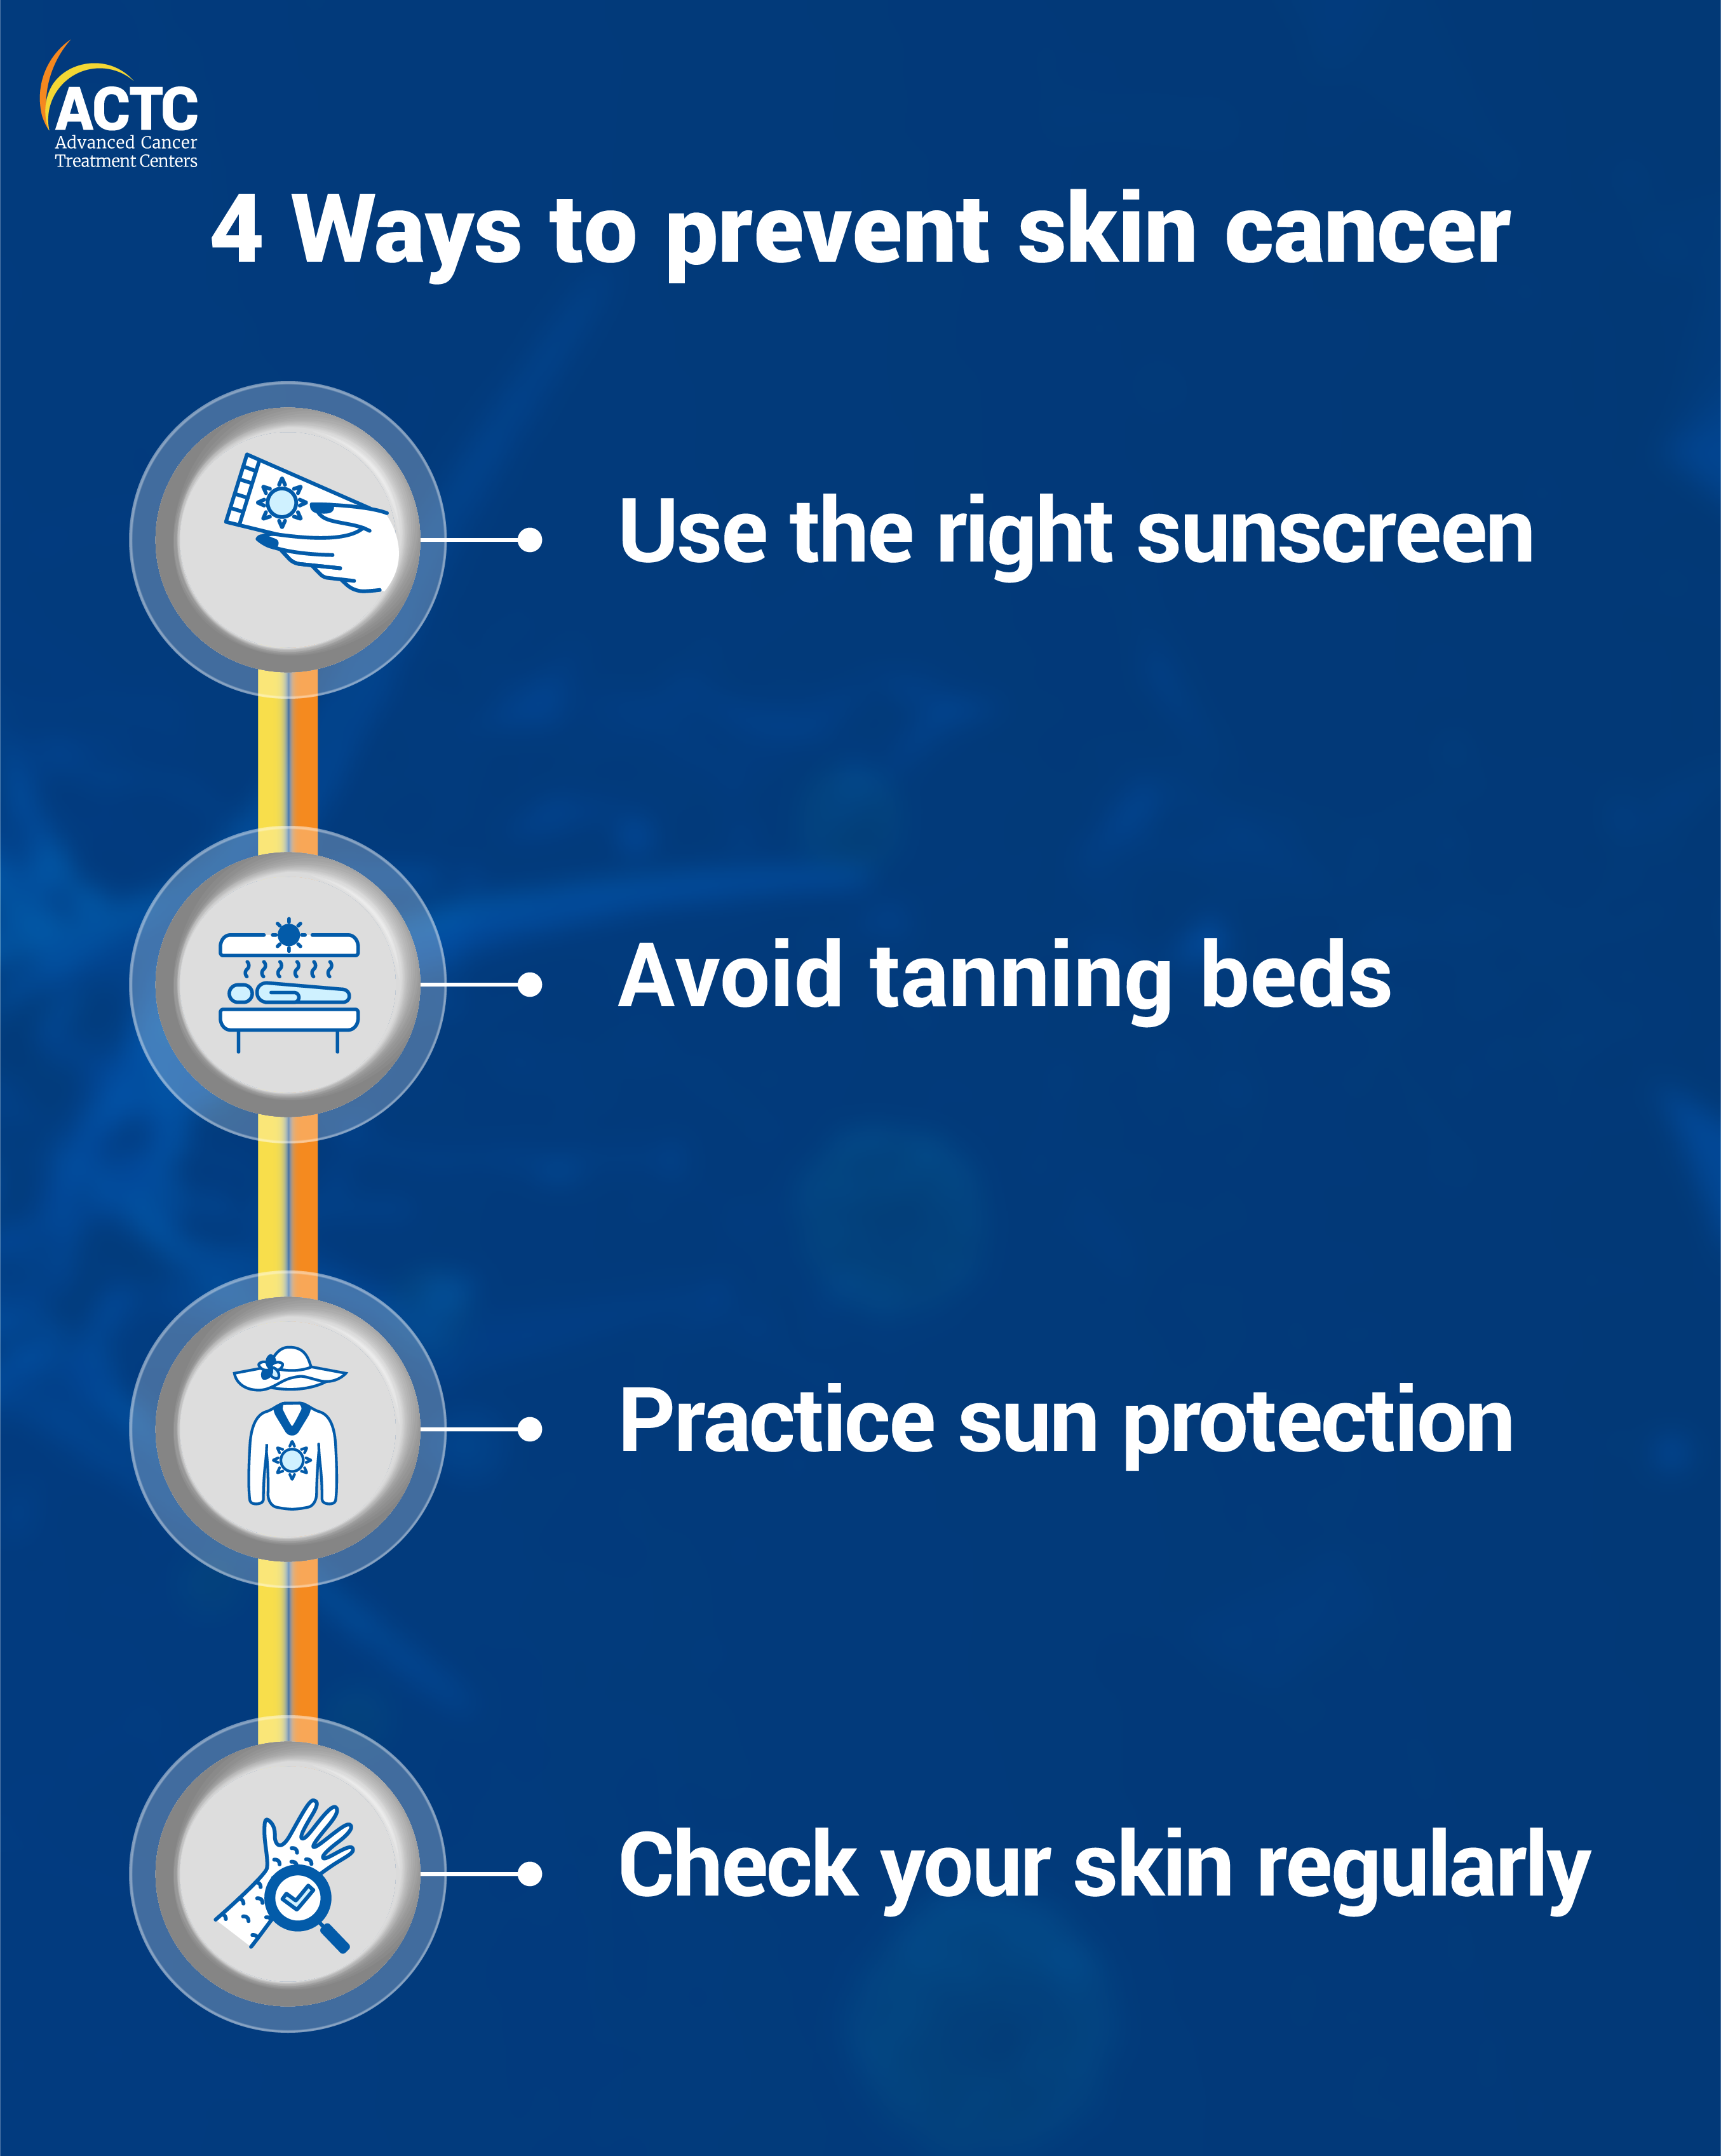 Why is skin cancer prevention necessary